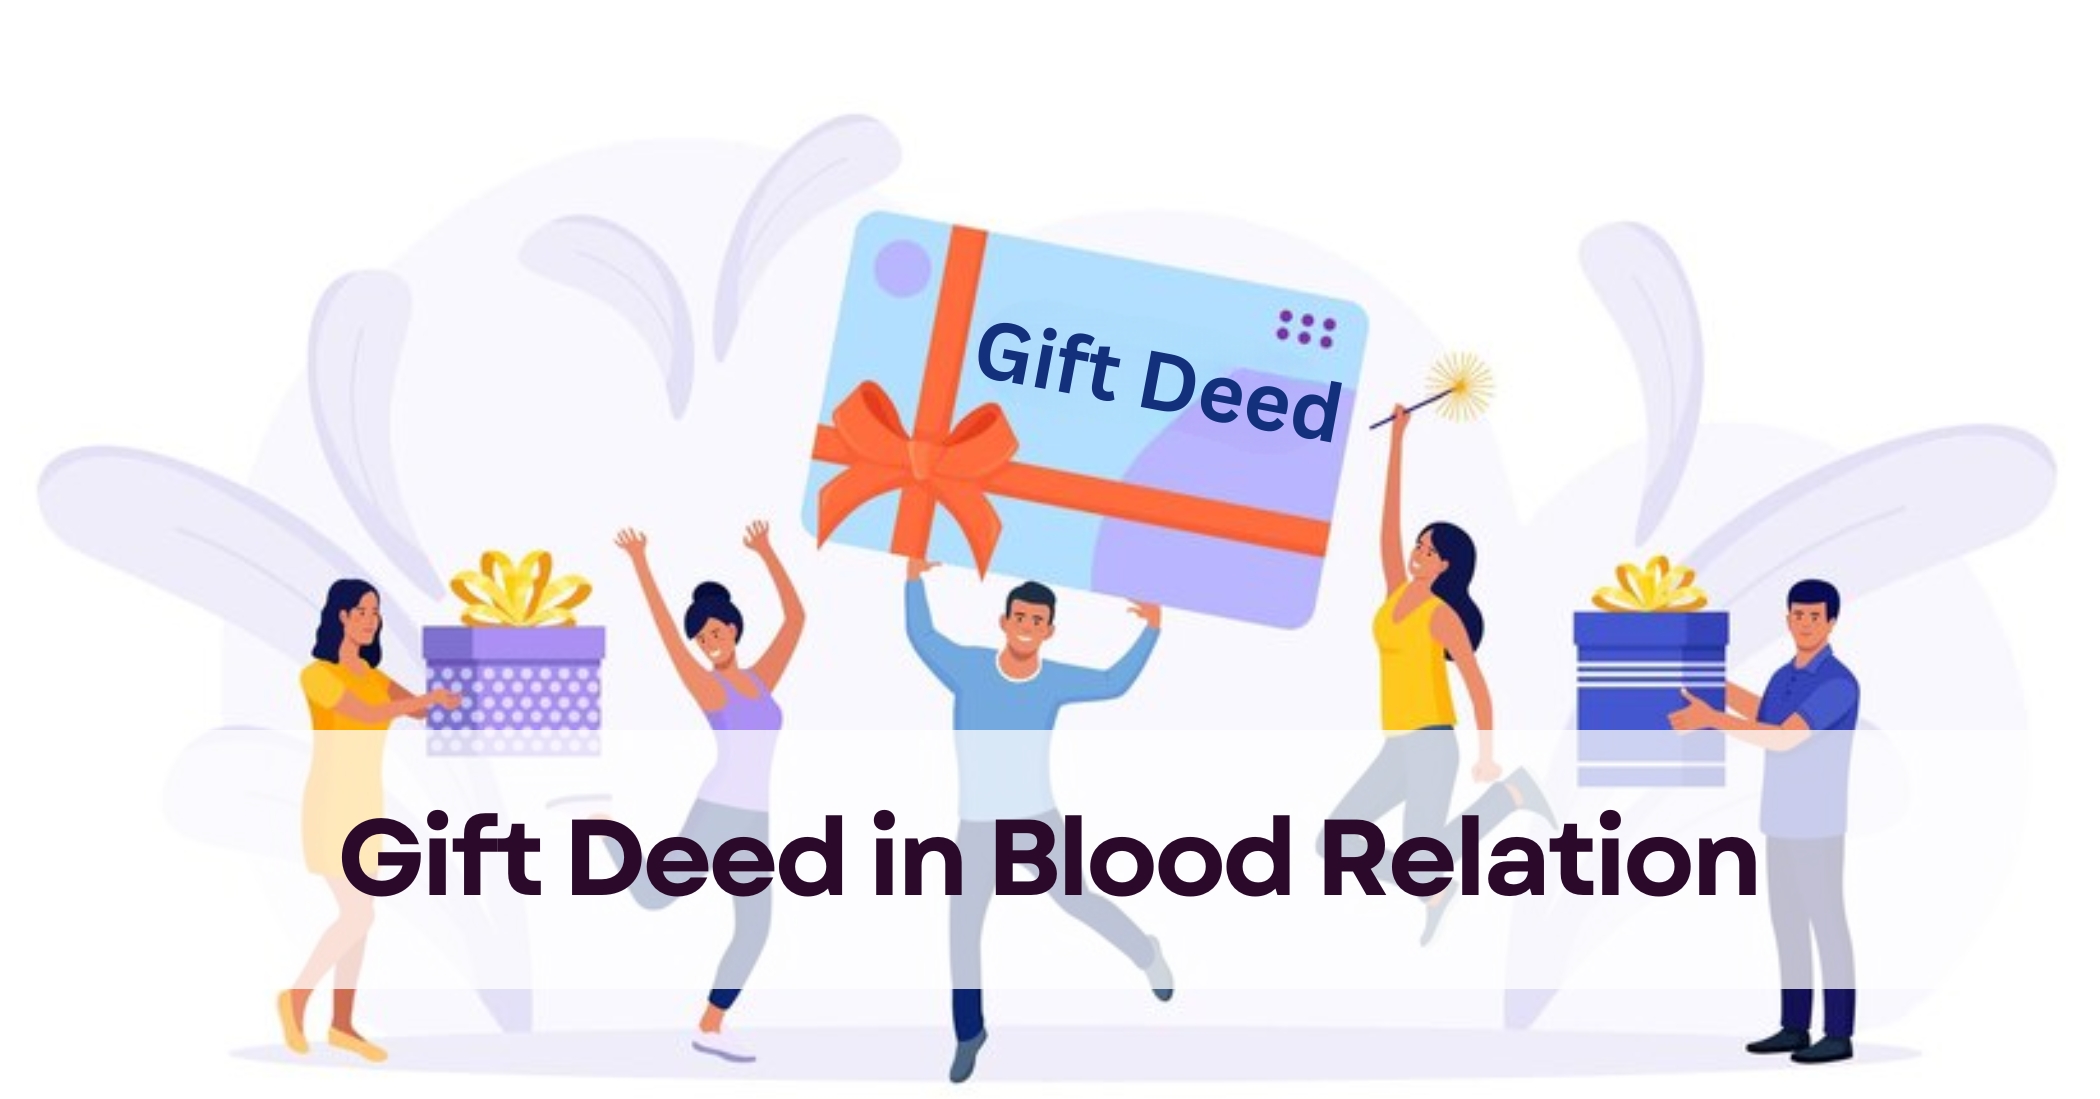 Featured image for “Is Gift Deed Possible Without Blood Relation? | Gift Deed in Blood Relation”